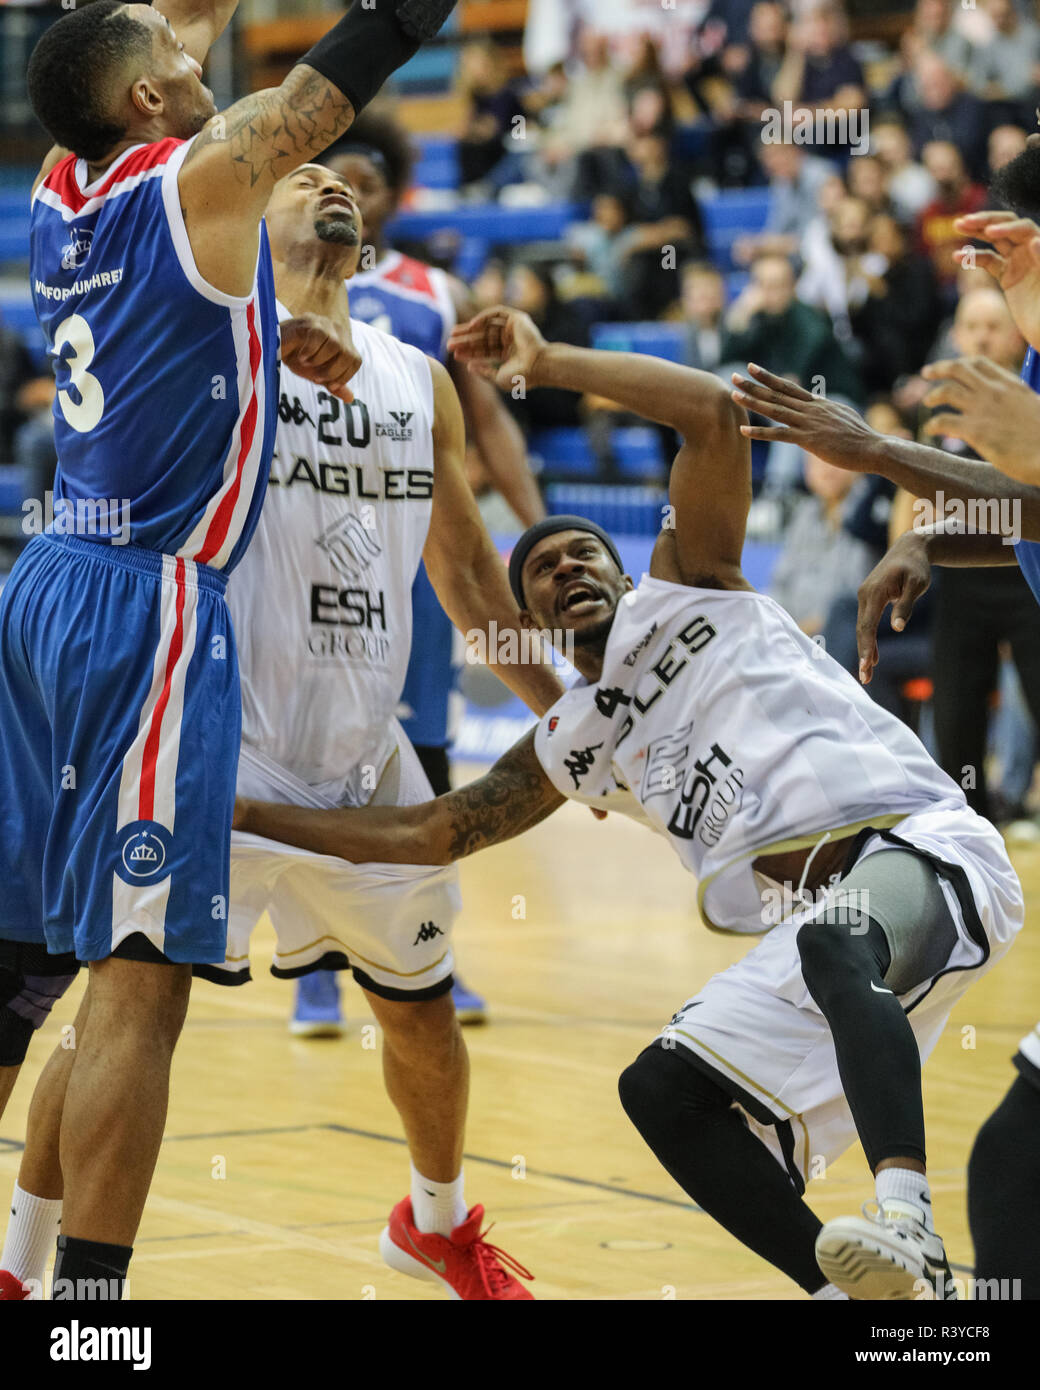 Crystal Palace Sports Centre, London, 24th Nov 2018. Eagles' Jeremy Smith  (4) on the attack. Tensions run high in the British Basketball League (BBL)  Championship game between hosts London City Royals and